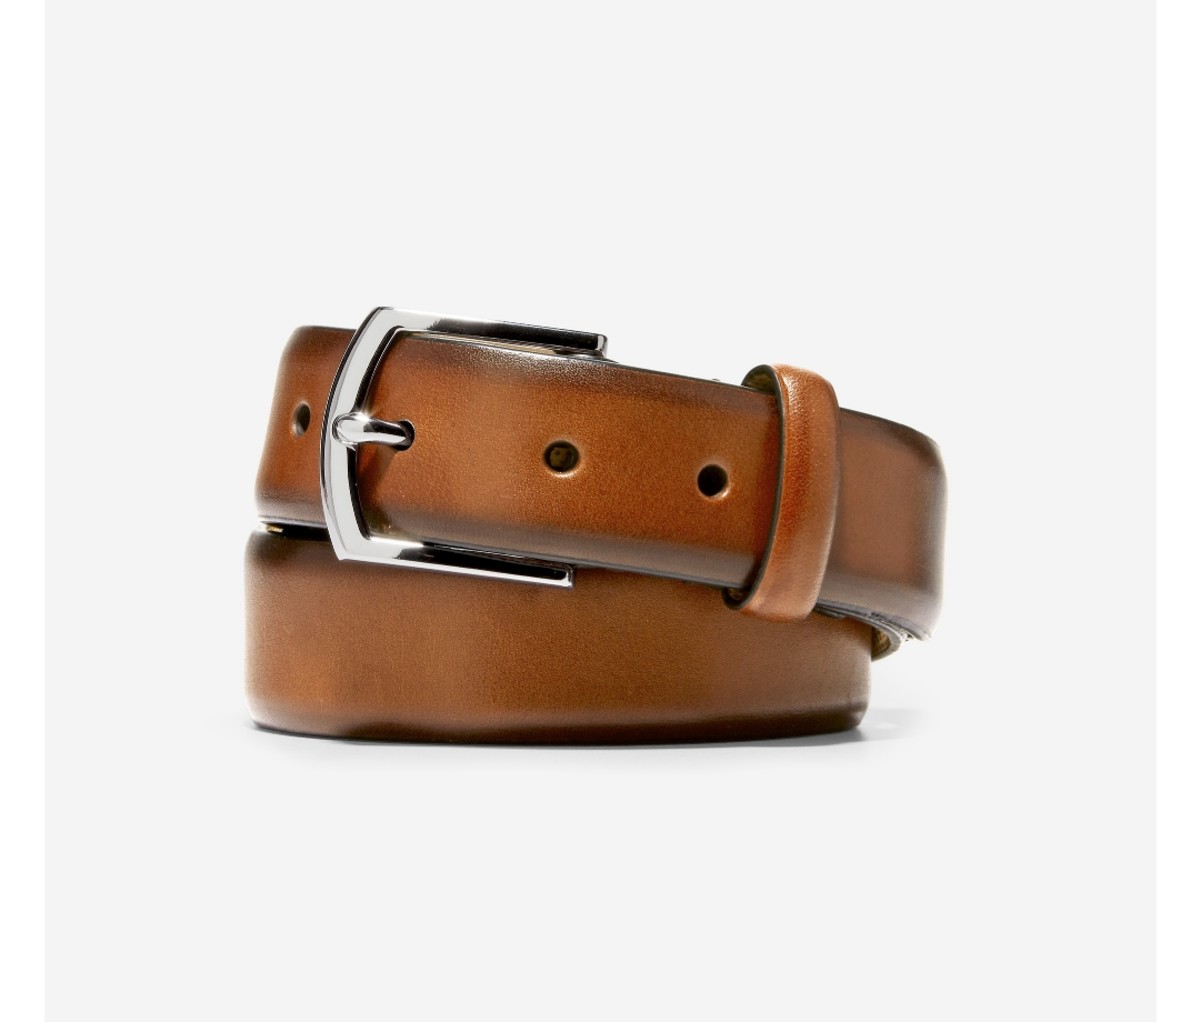 The 6 Belts Every Man Should Have in His Closet